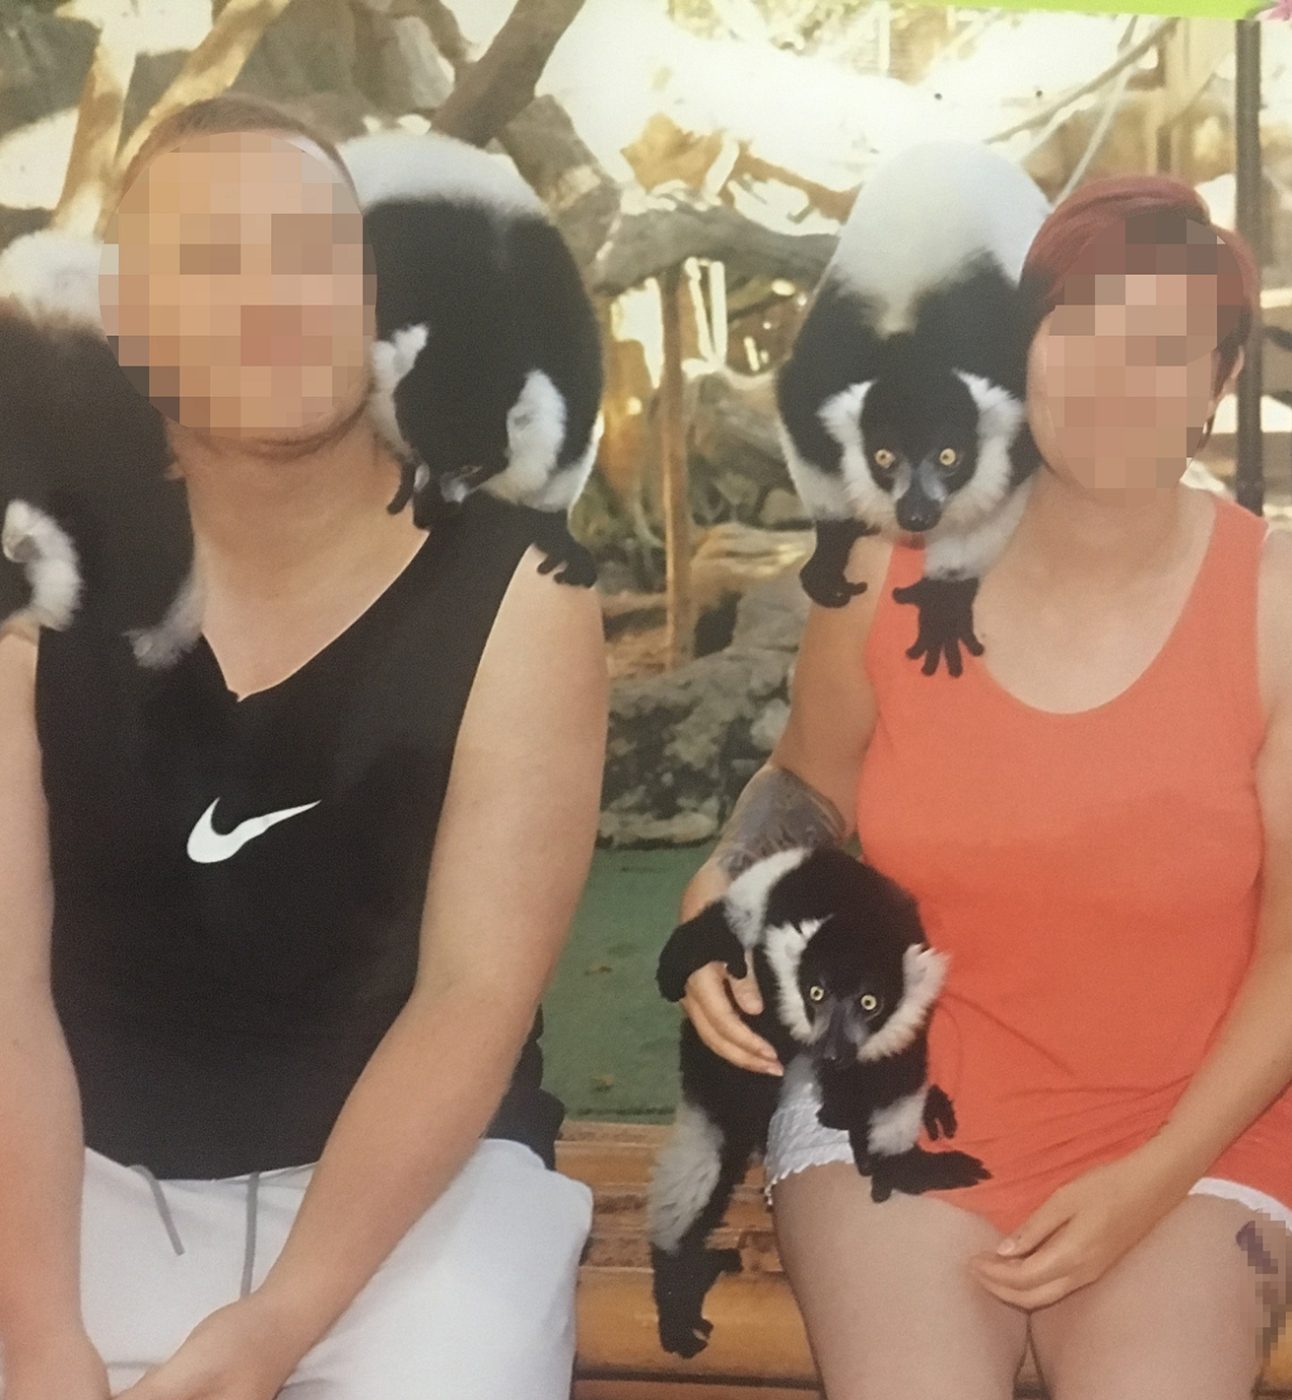 A man and woman with blurred faces sit with five lemurs on their shoulders and laps